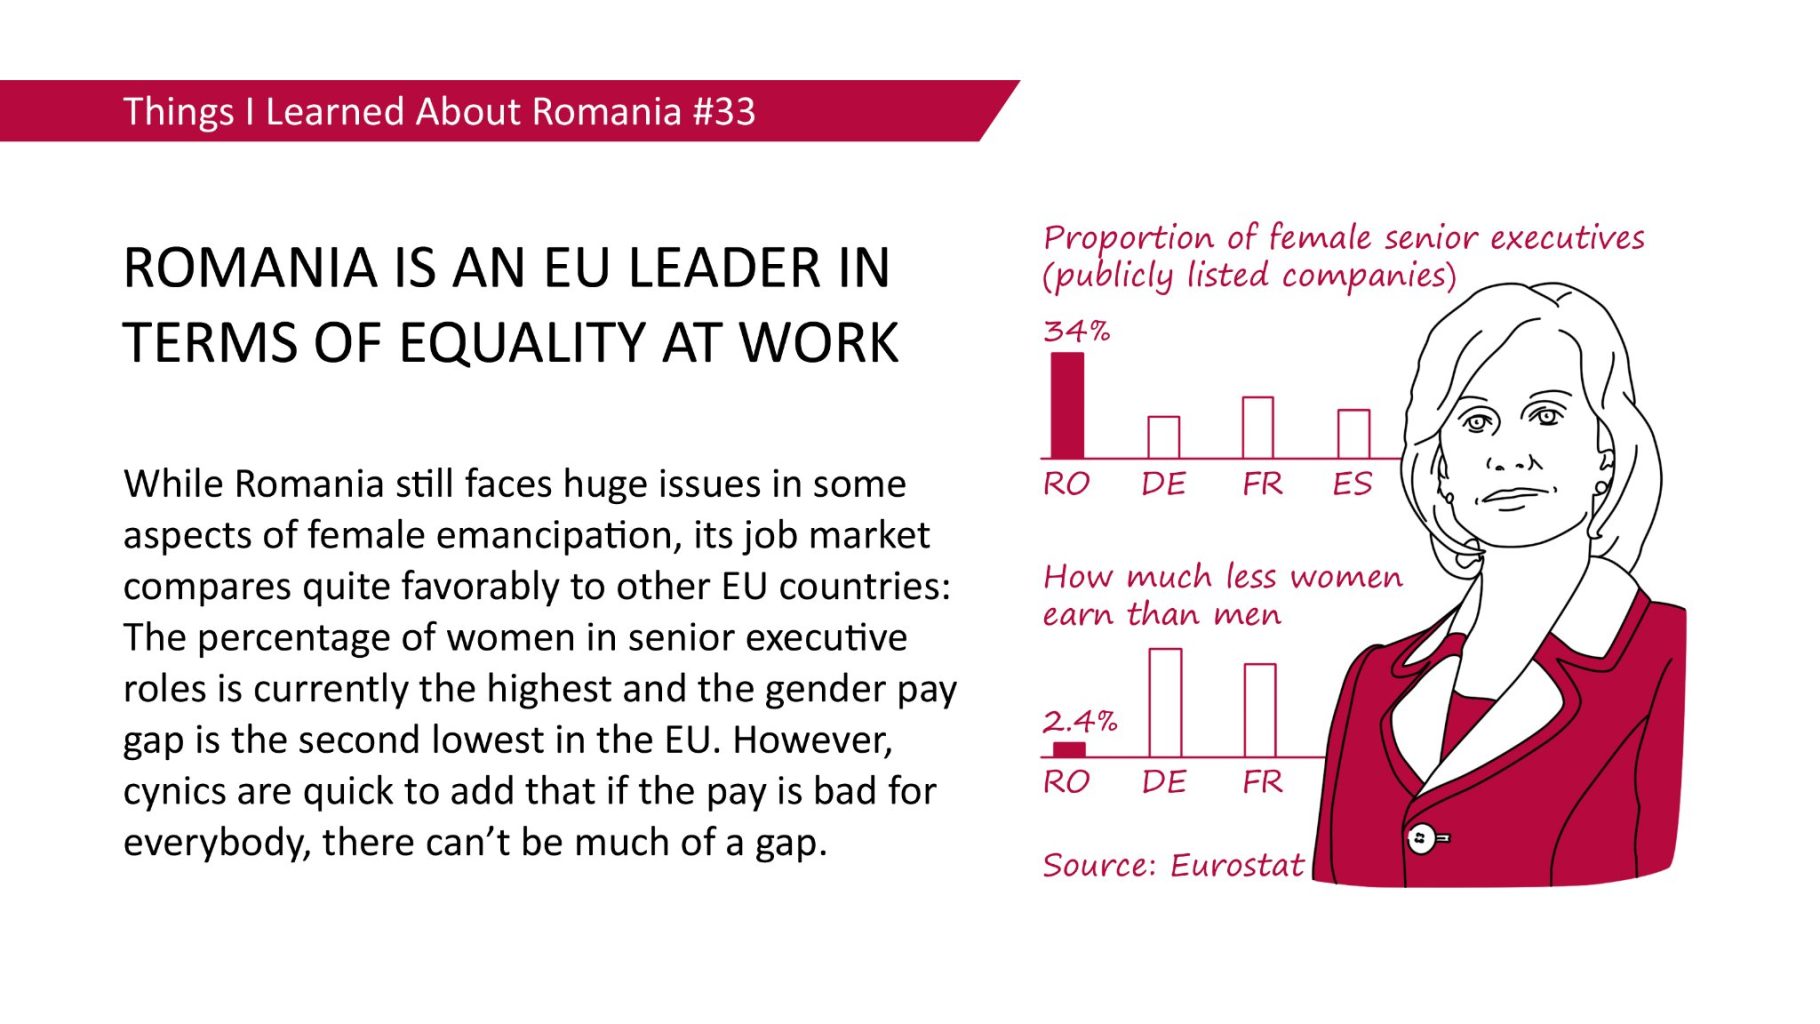 ROMANIA IS AN EU LEADER IN TERMS OF EQUALITY AT WORK - While Romania still faces huge issues in some aspects of female emancipation, its job market compares quite favorably to other EU countries: The percentage of women in senior executive roles is currently the highest and the gender pay gap is the second lowest in the EU. However, cynics are quick to add that if the pay is bad for everybody, there can't be much of a gap.